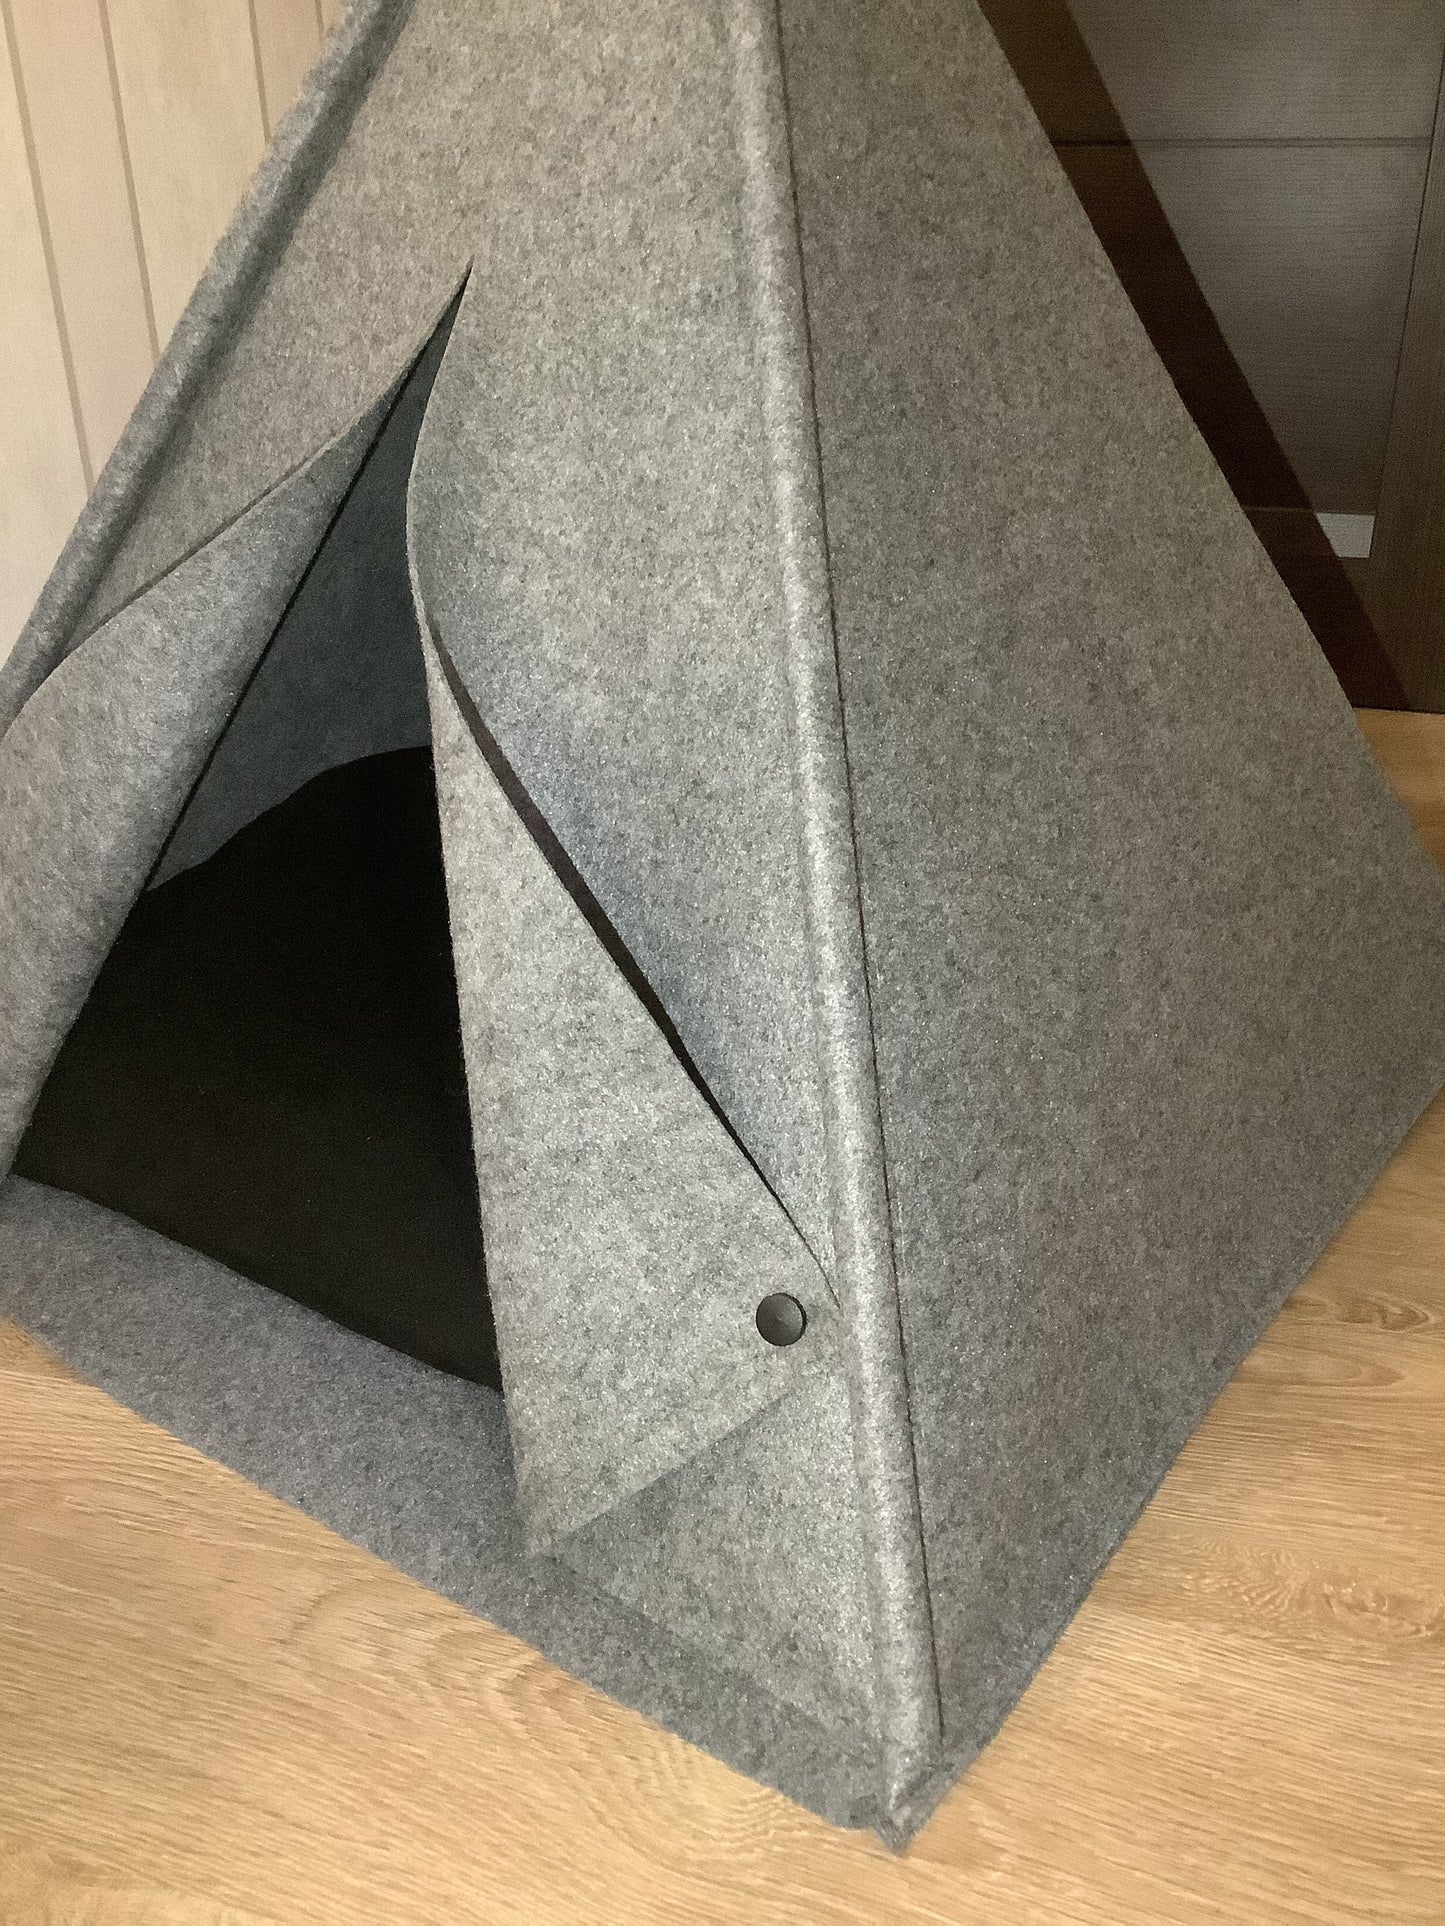 Bunny bed house indoor, rabbit bed, Can be Personalized curtain design for closing and relaxing pets new unique teepee design dog bed animal